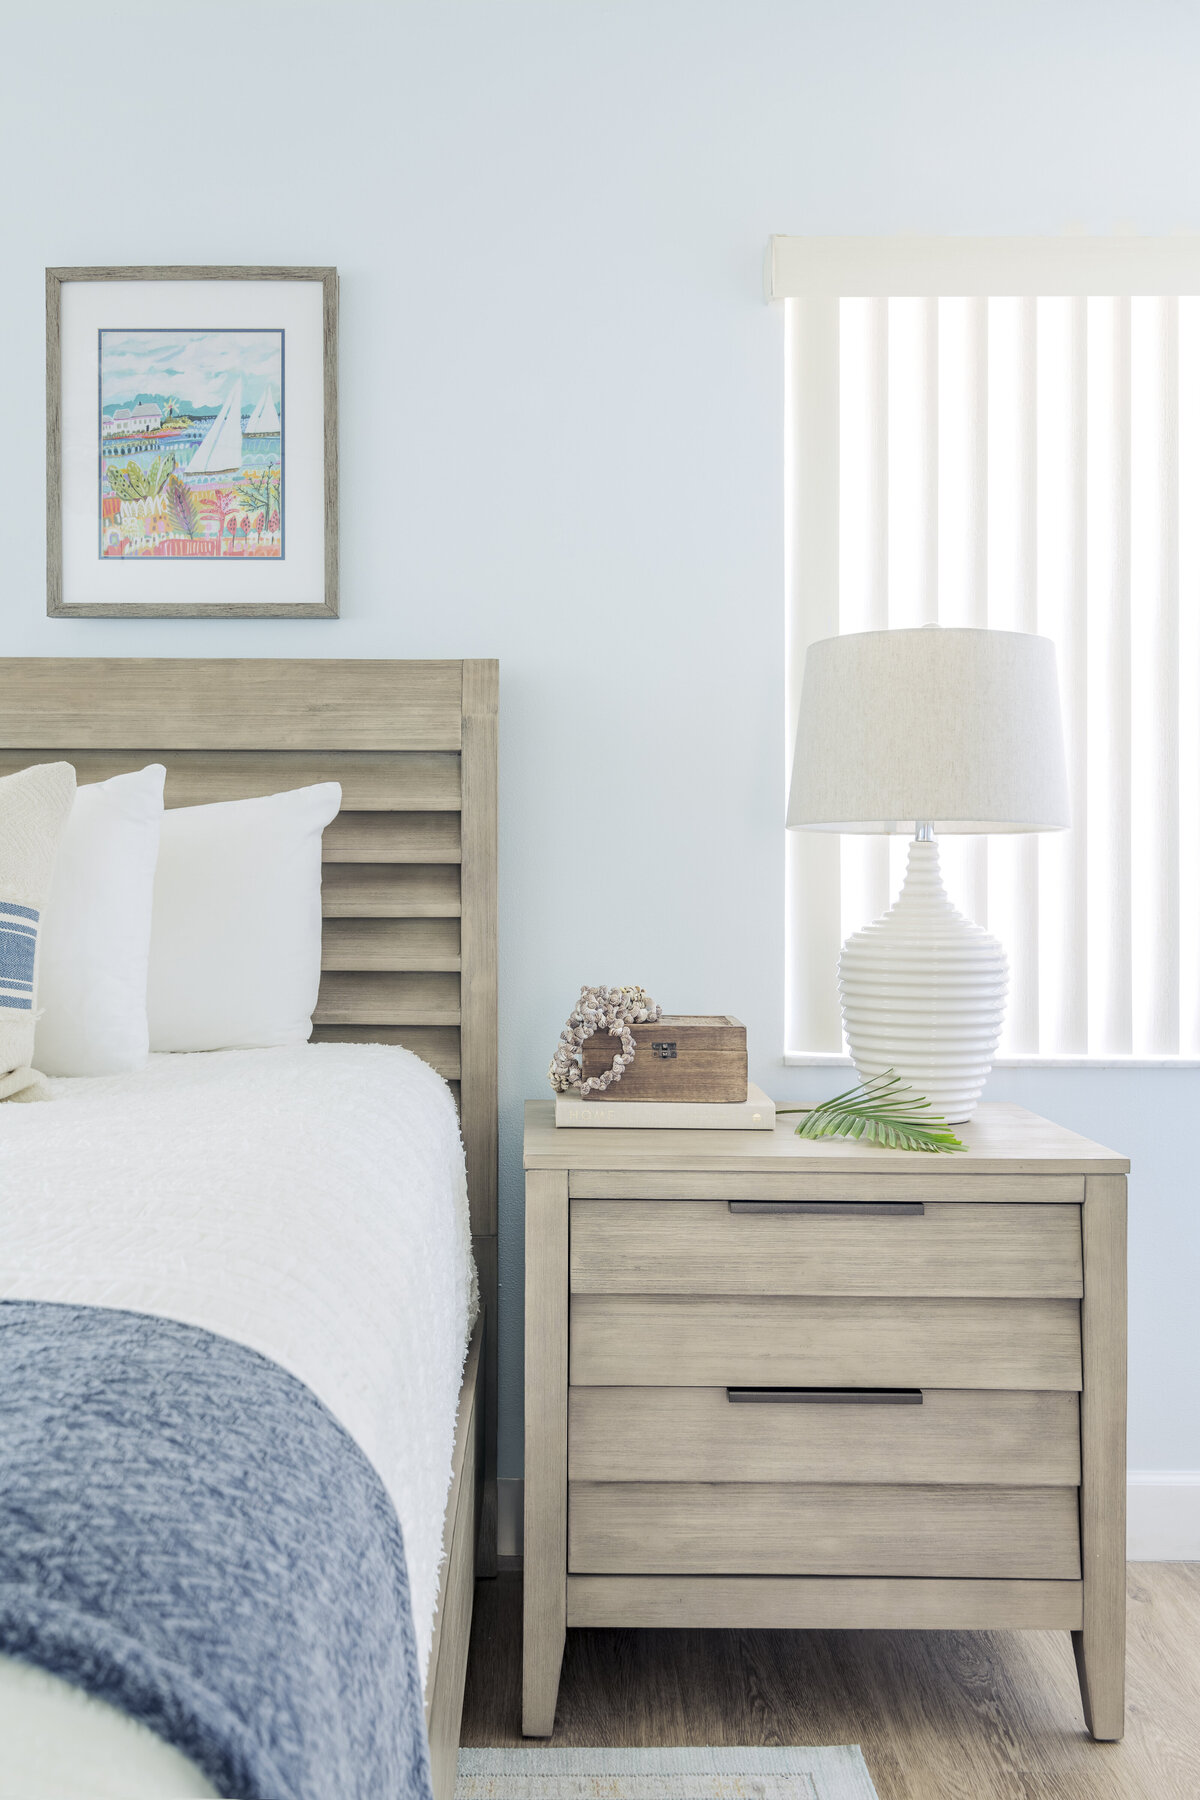 Moden Coastal Bed and Nightstand design by S. Fl based SOL Y MAR INTERIORS